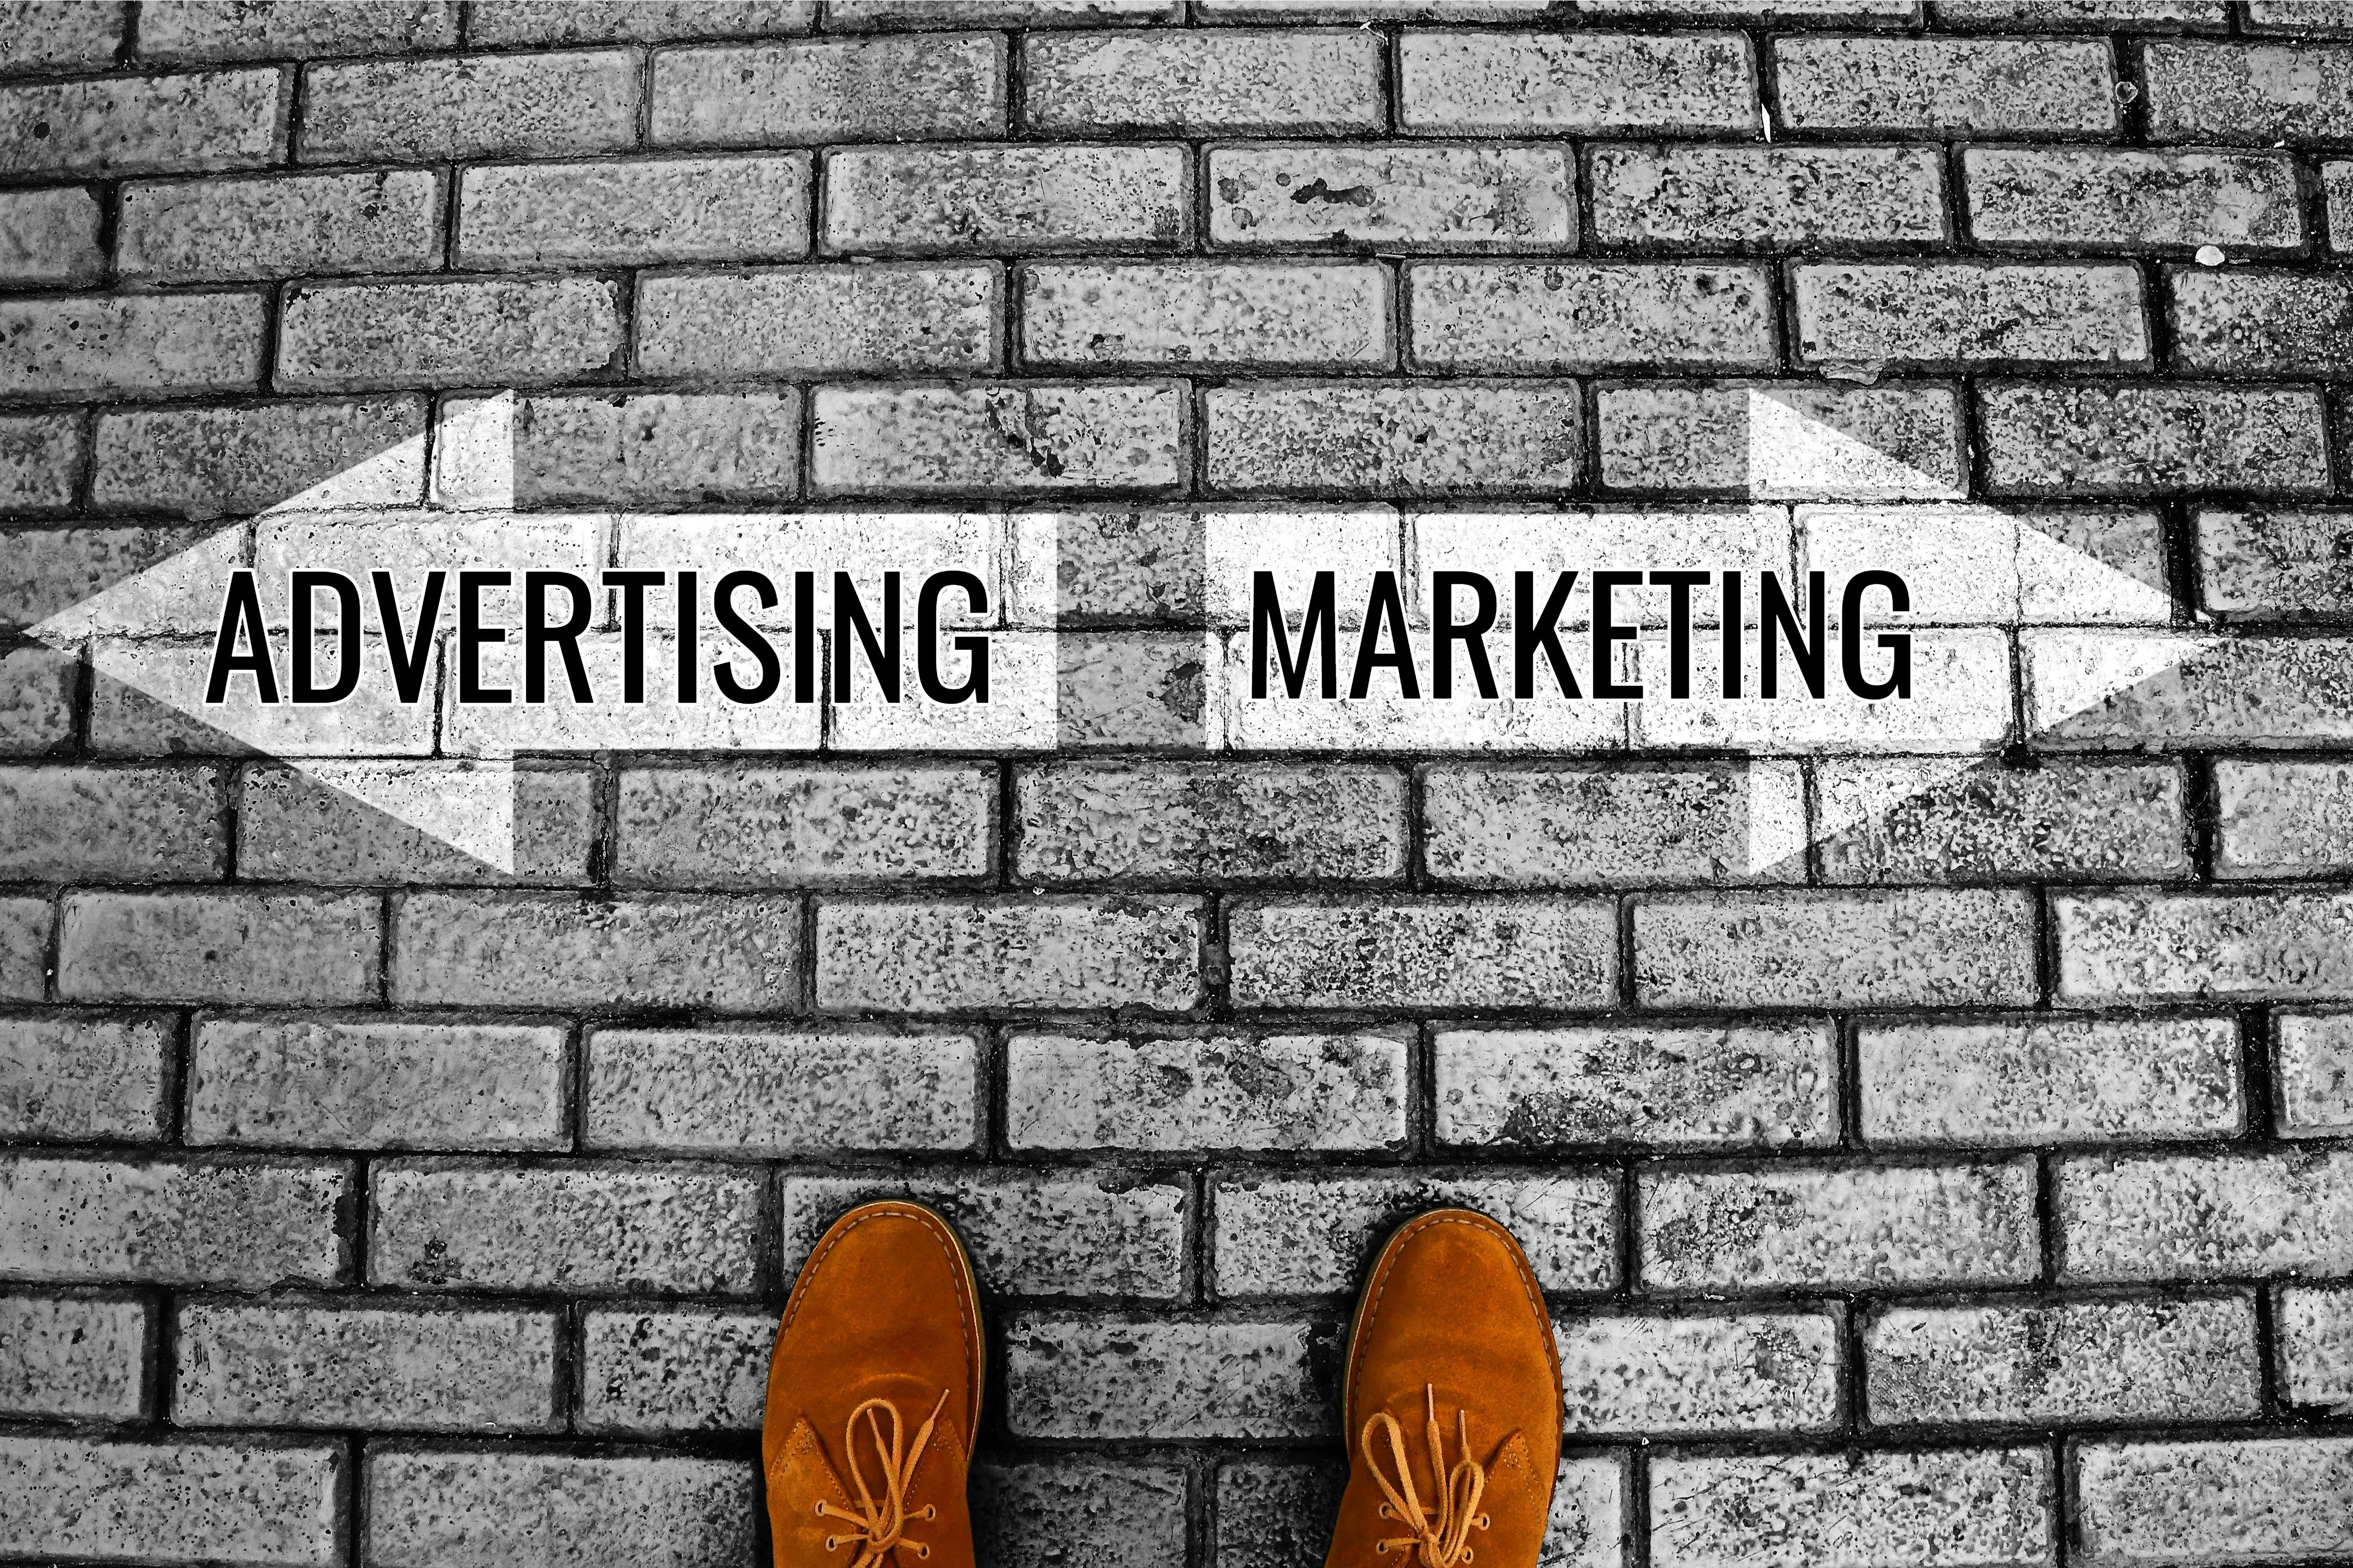 Advertising vs Marketing: What's the Difference?